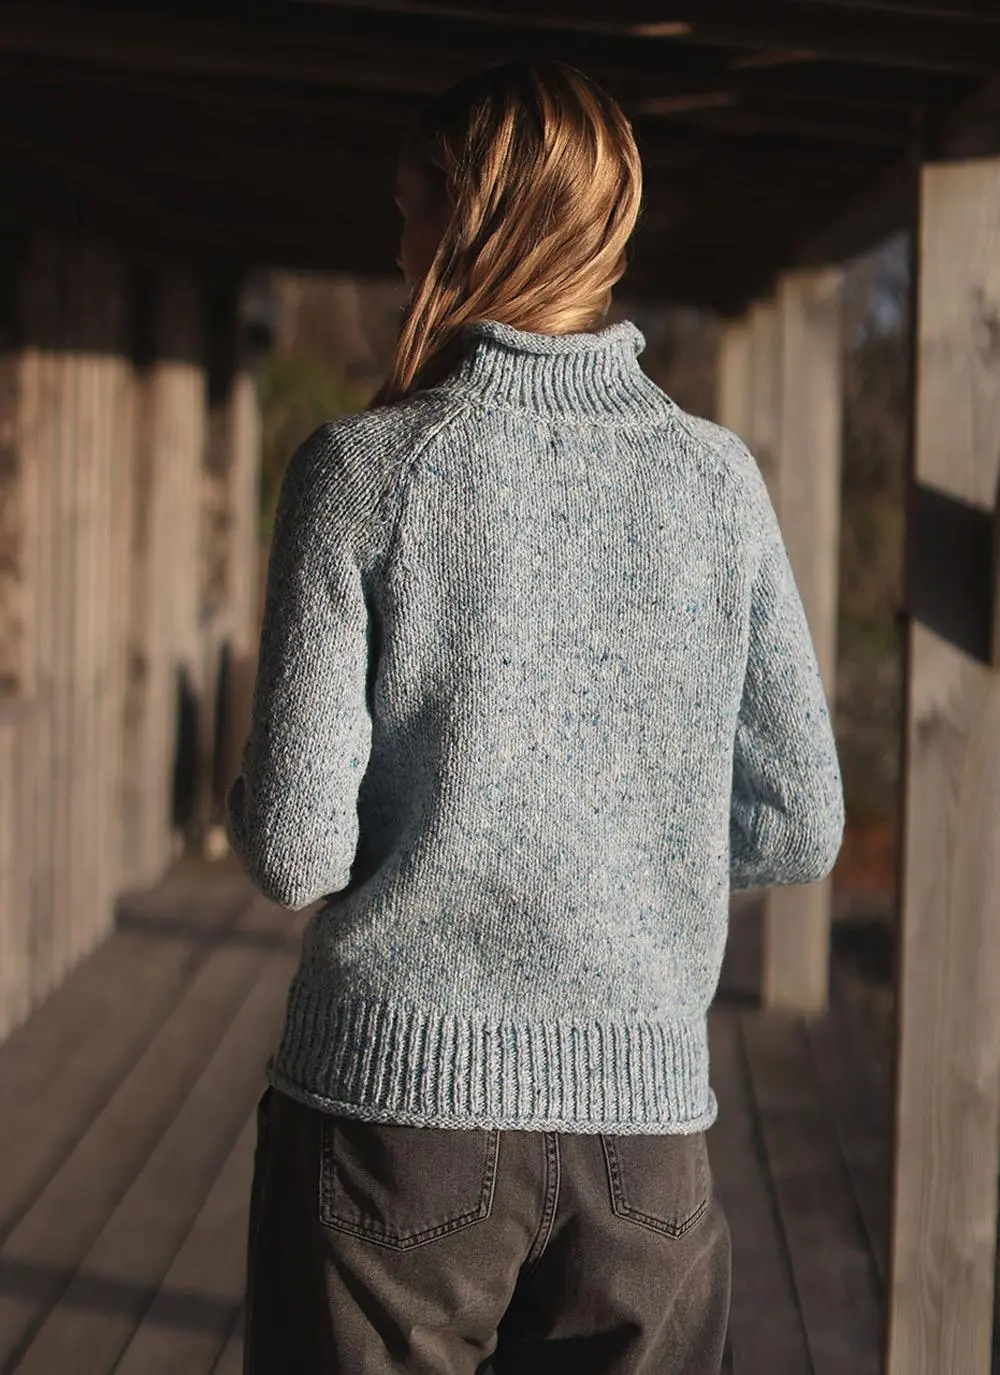 back angle shot of blonde woman wearing blue sweater with stable in background